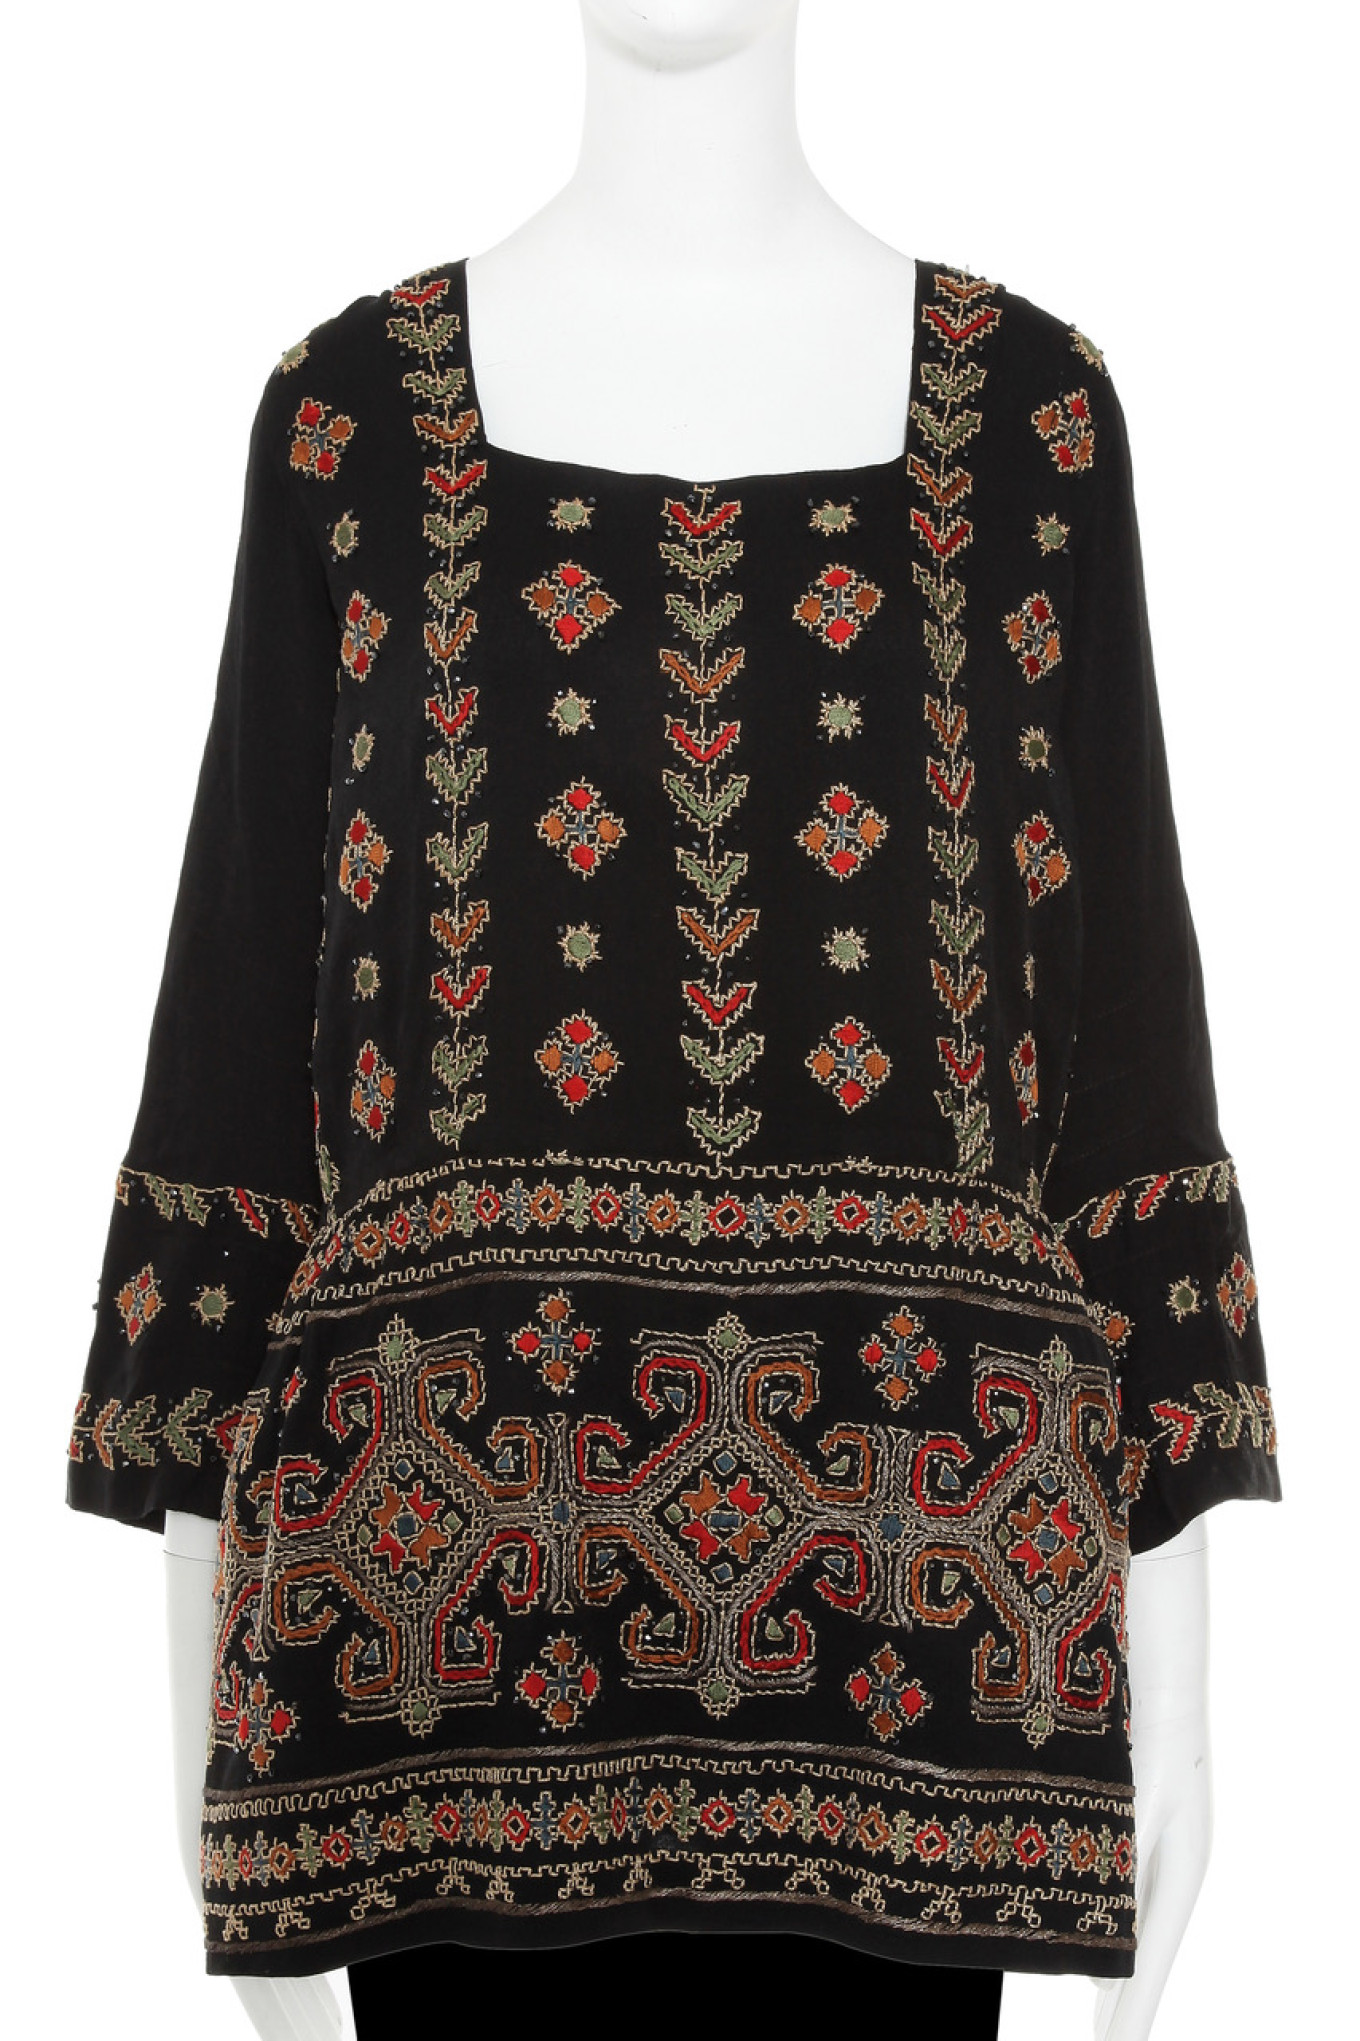  Rare 1922 Chanel tunic with Russian-inspired embroidery Kerry Taylor 